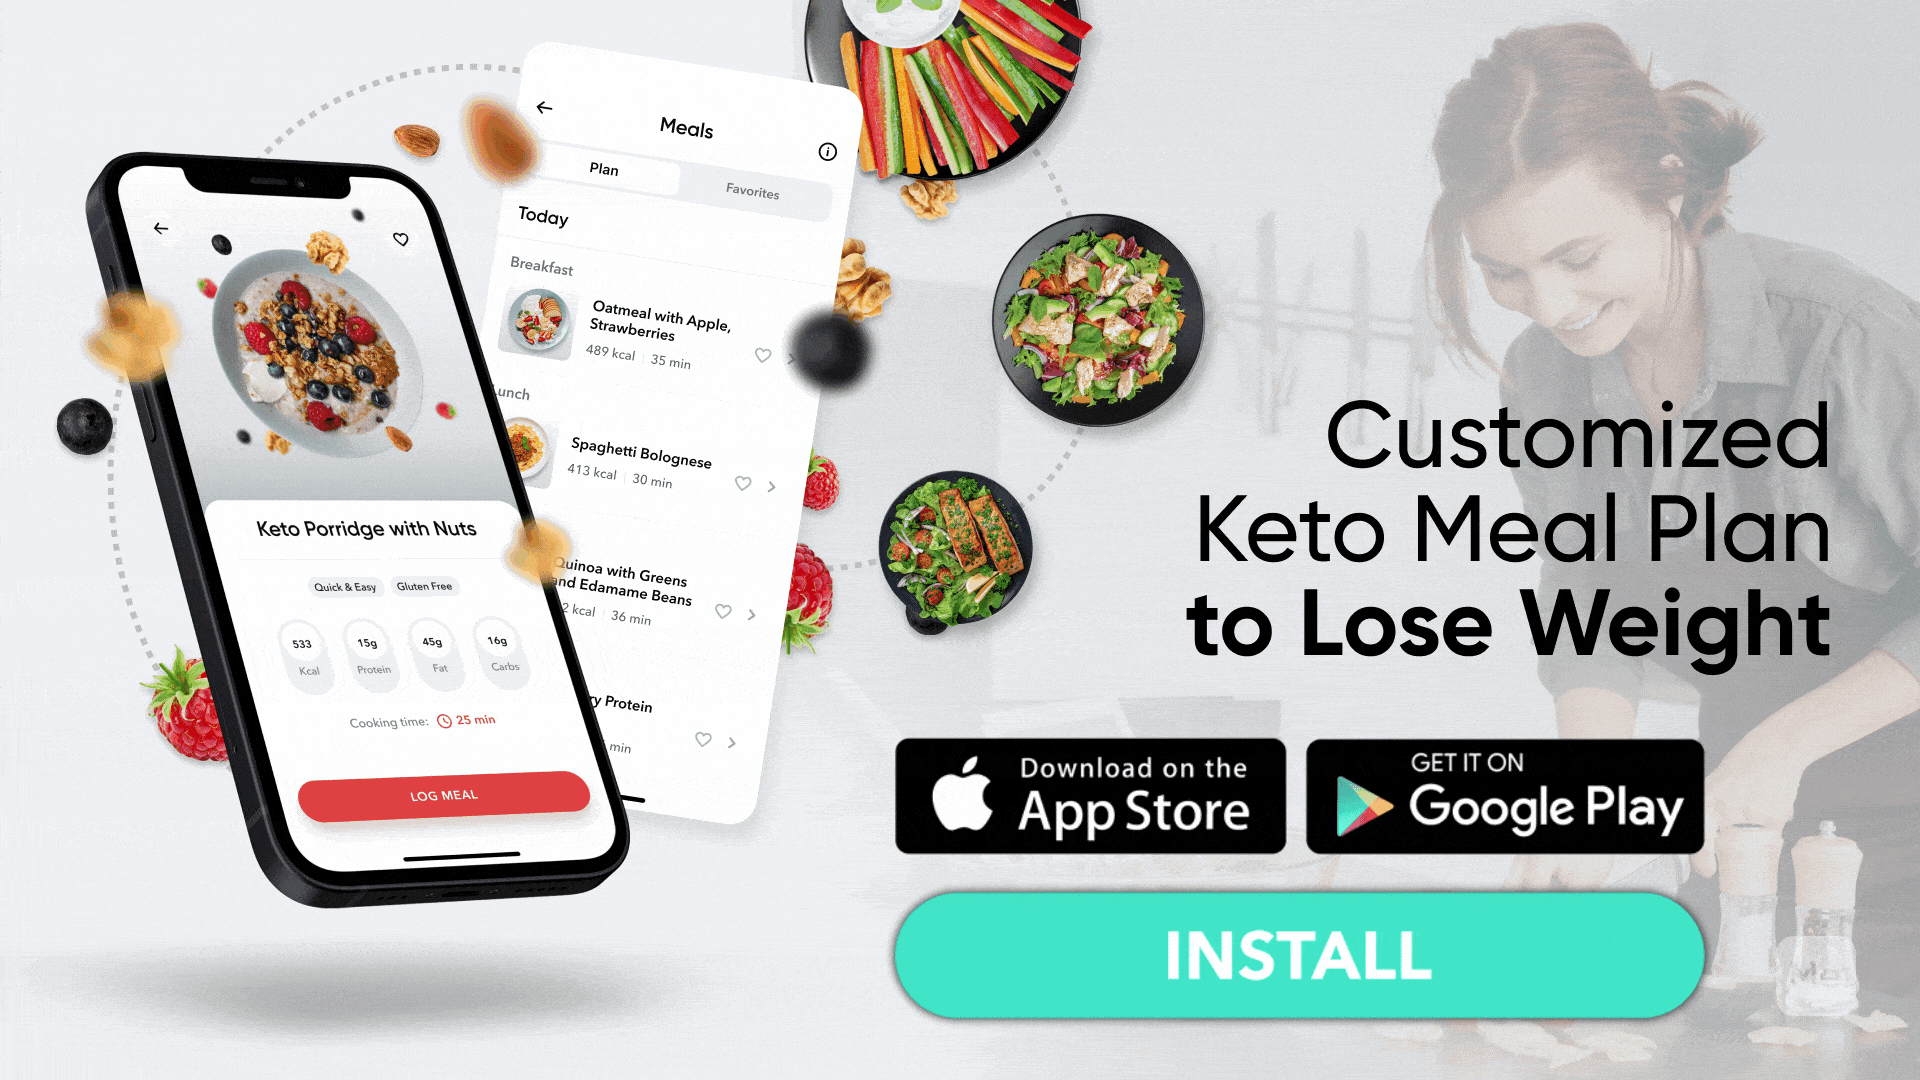 Customized Keto Meal Plan to Lose Weight